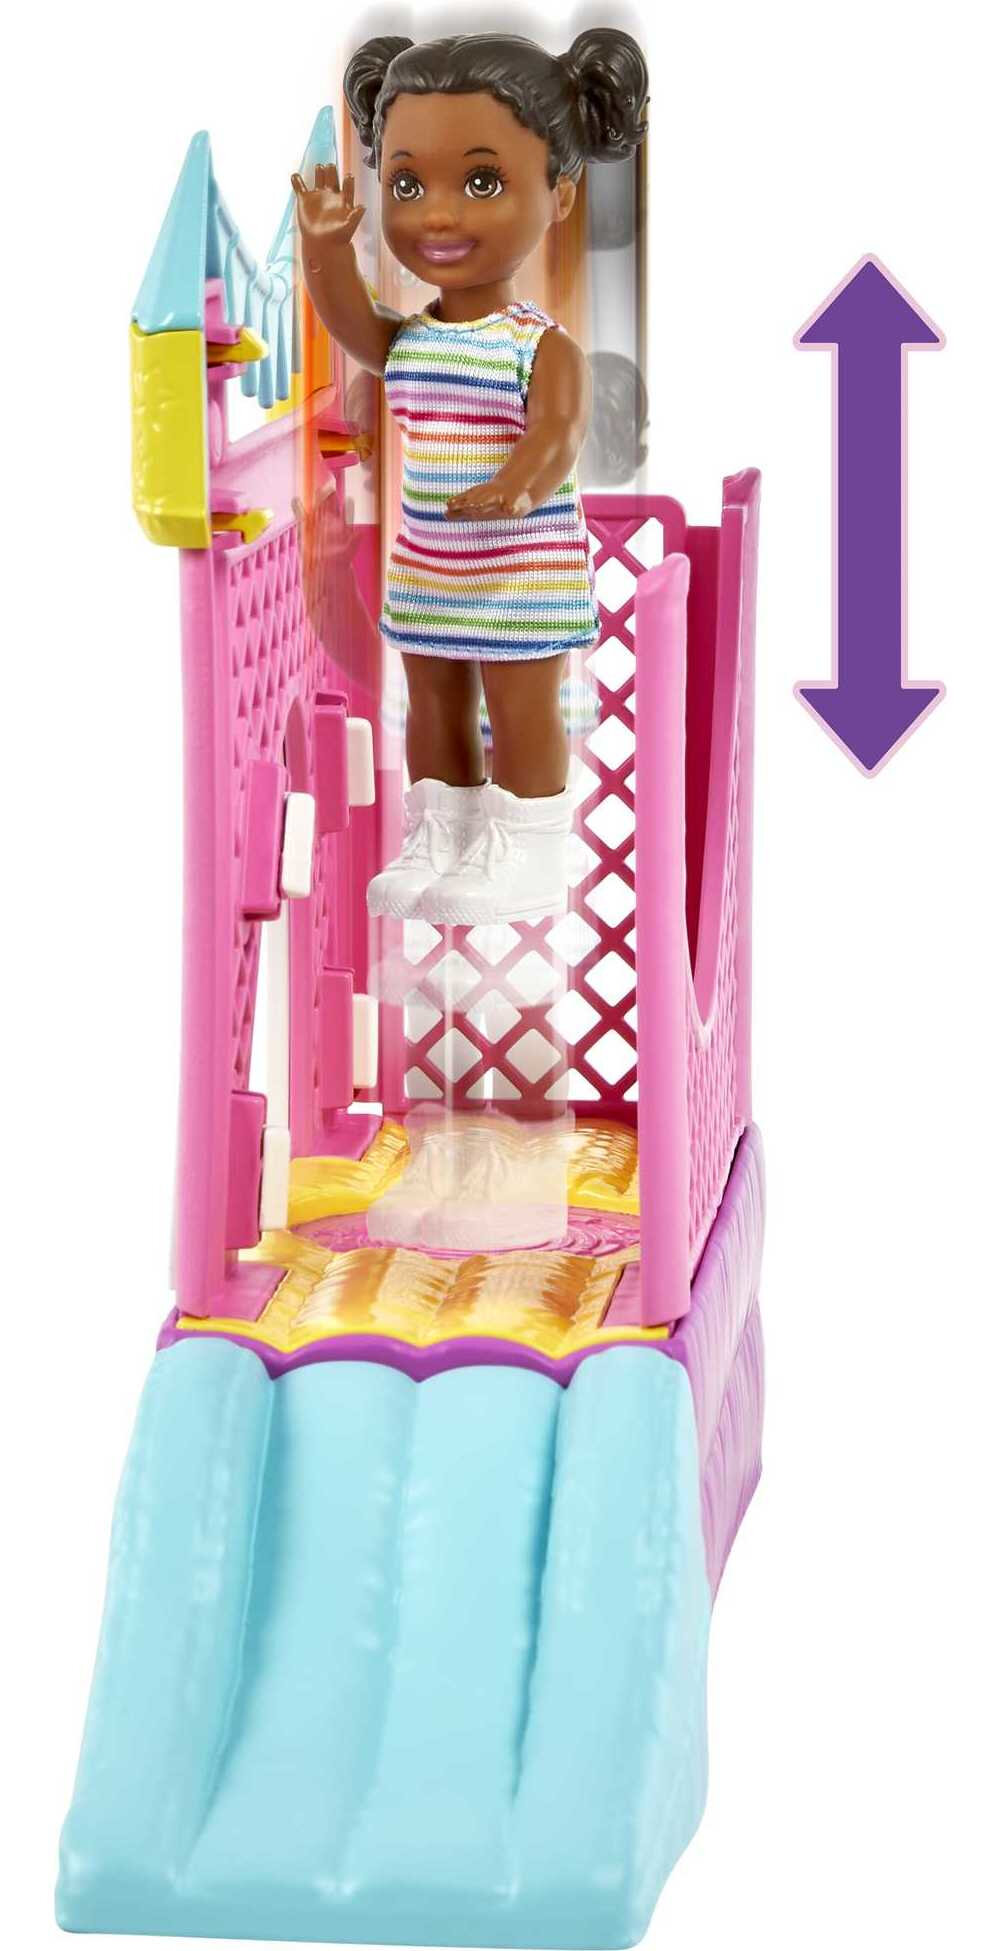 Barbie Skipper Babysitters Inc Bounce House Playset, Skipper Doll, Toddler Small Doll & Accessories - image 3 of 7